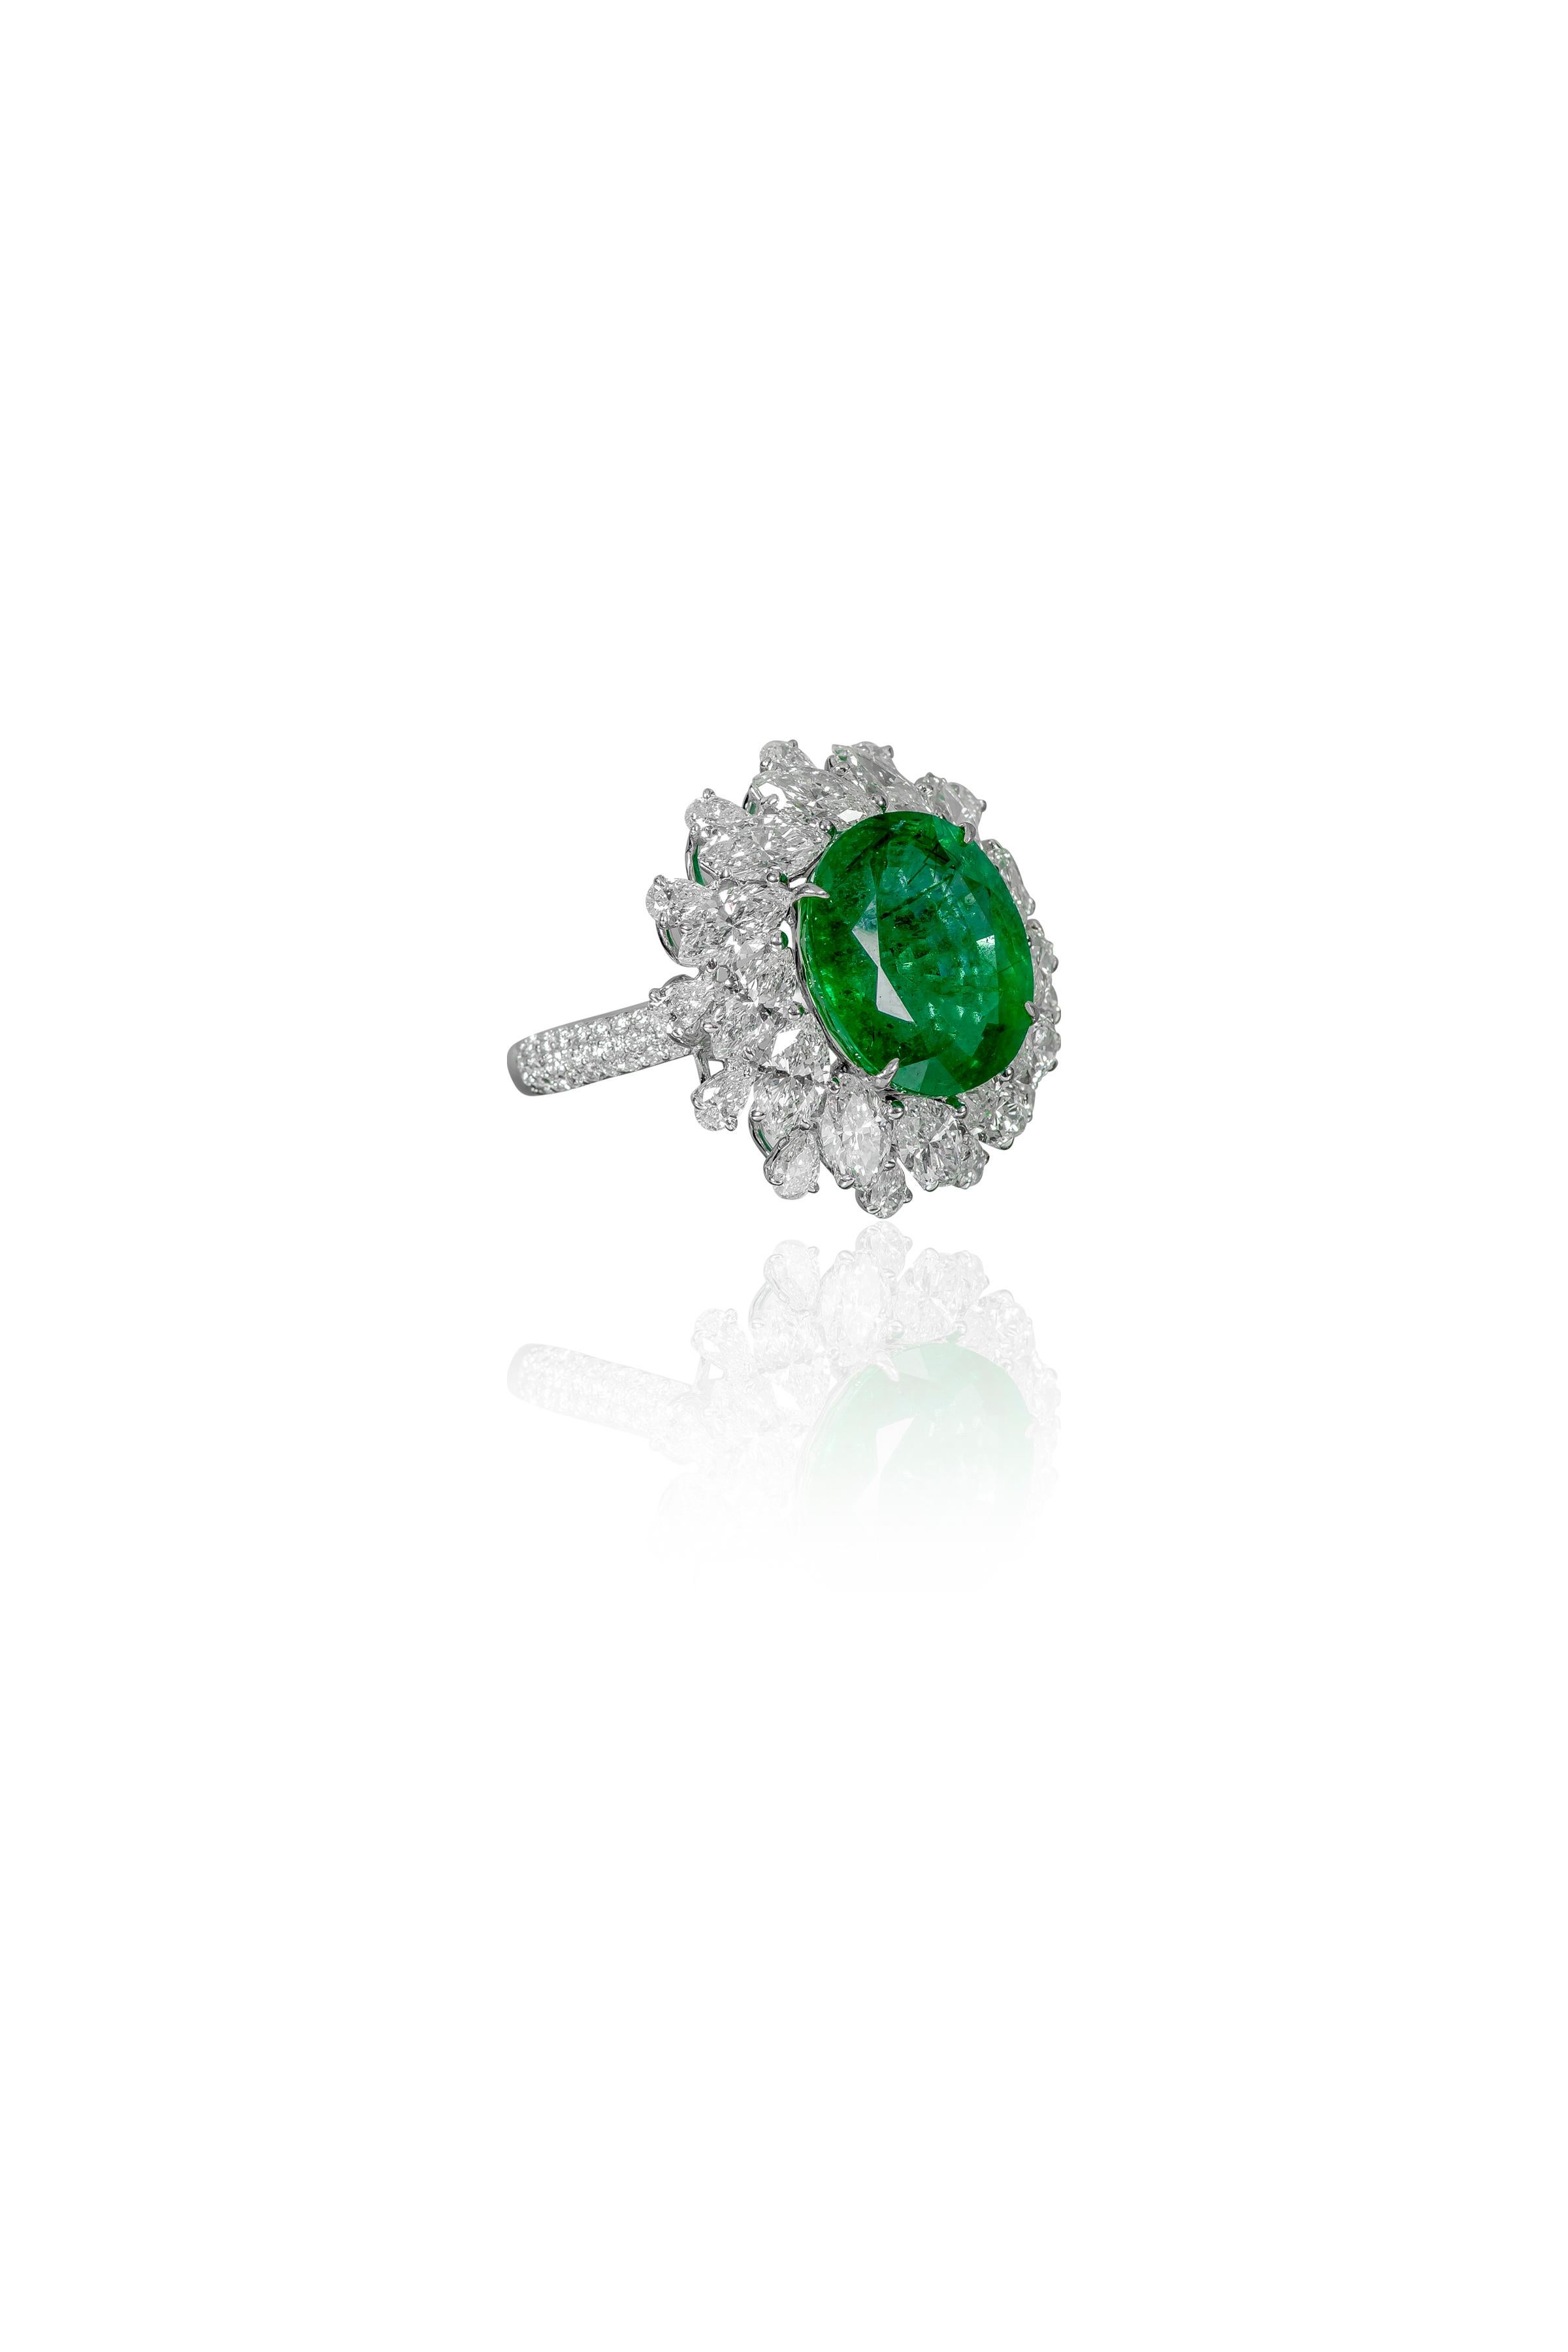 18 Karat White Gold 6.98 Carat Natural Emerald and Diamond Cluster Statement Ring

This mesmerizing rich-lush garden green emerald and diamond ring is impressive. The solitaire roundish-oval shape emerald is incredibly set in the 4-eagle prong